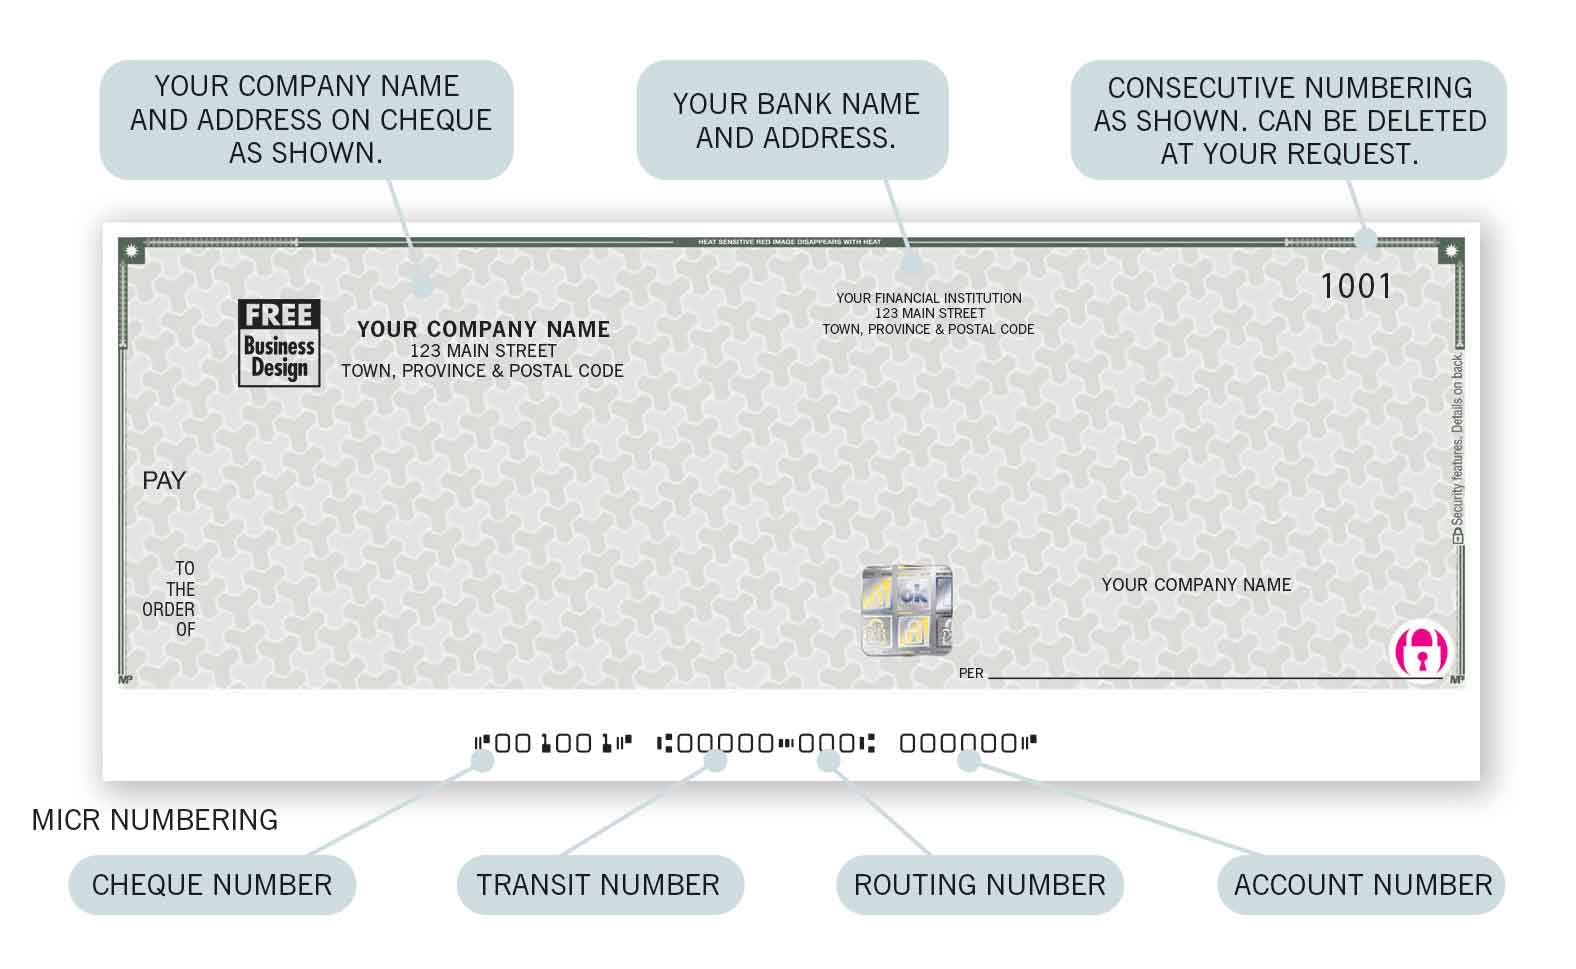 how to order cheques online